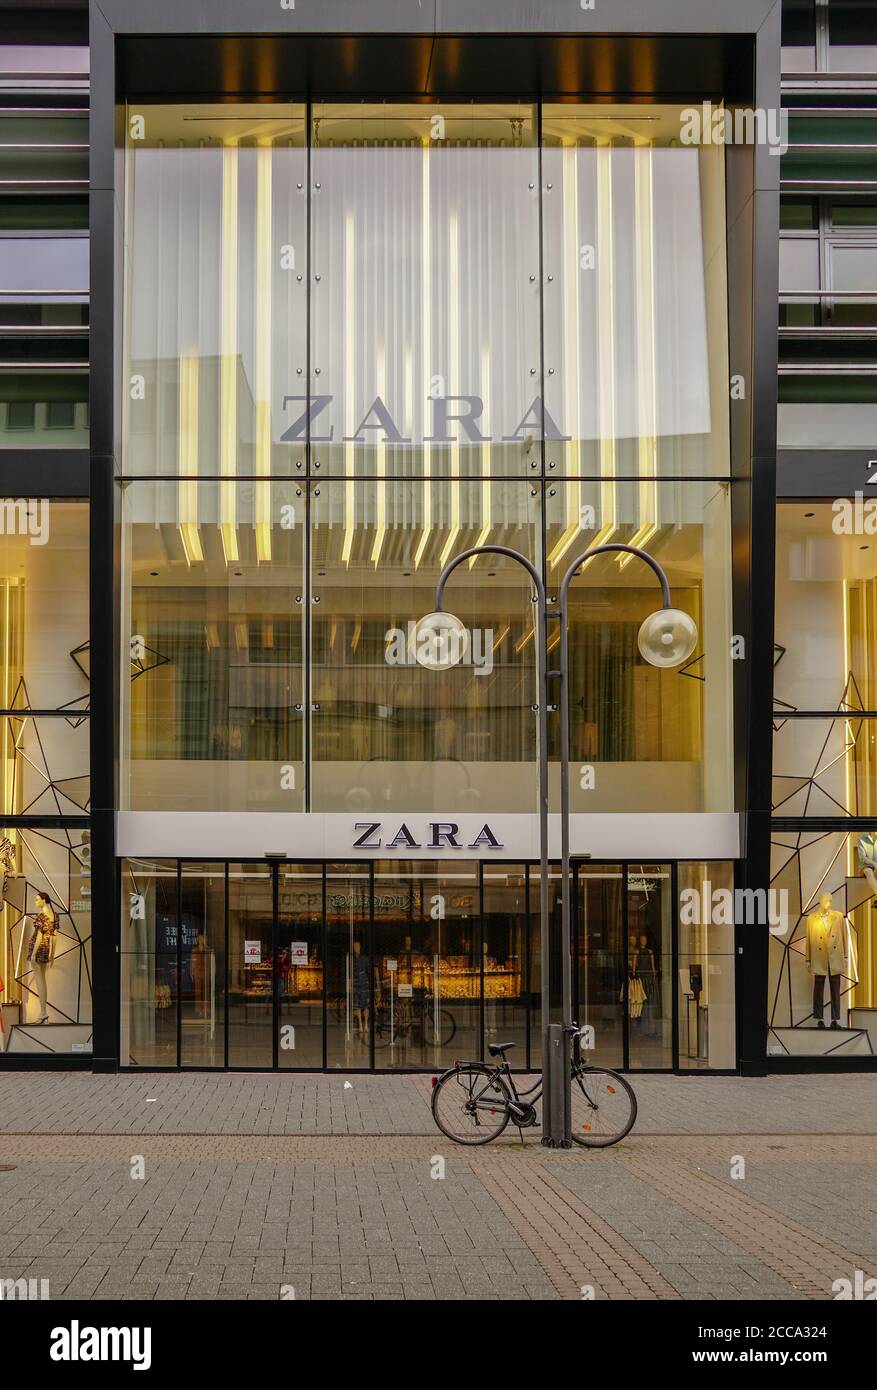 COLOGNE, GERMANY - Aug 02, 2020: Zara fashion store seen from the frontside  in the Schildergasse in Cologne Stock Photo - Alamy